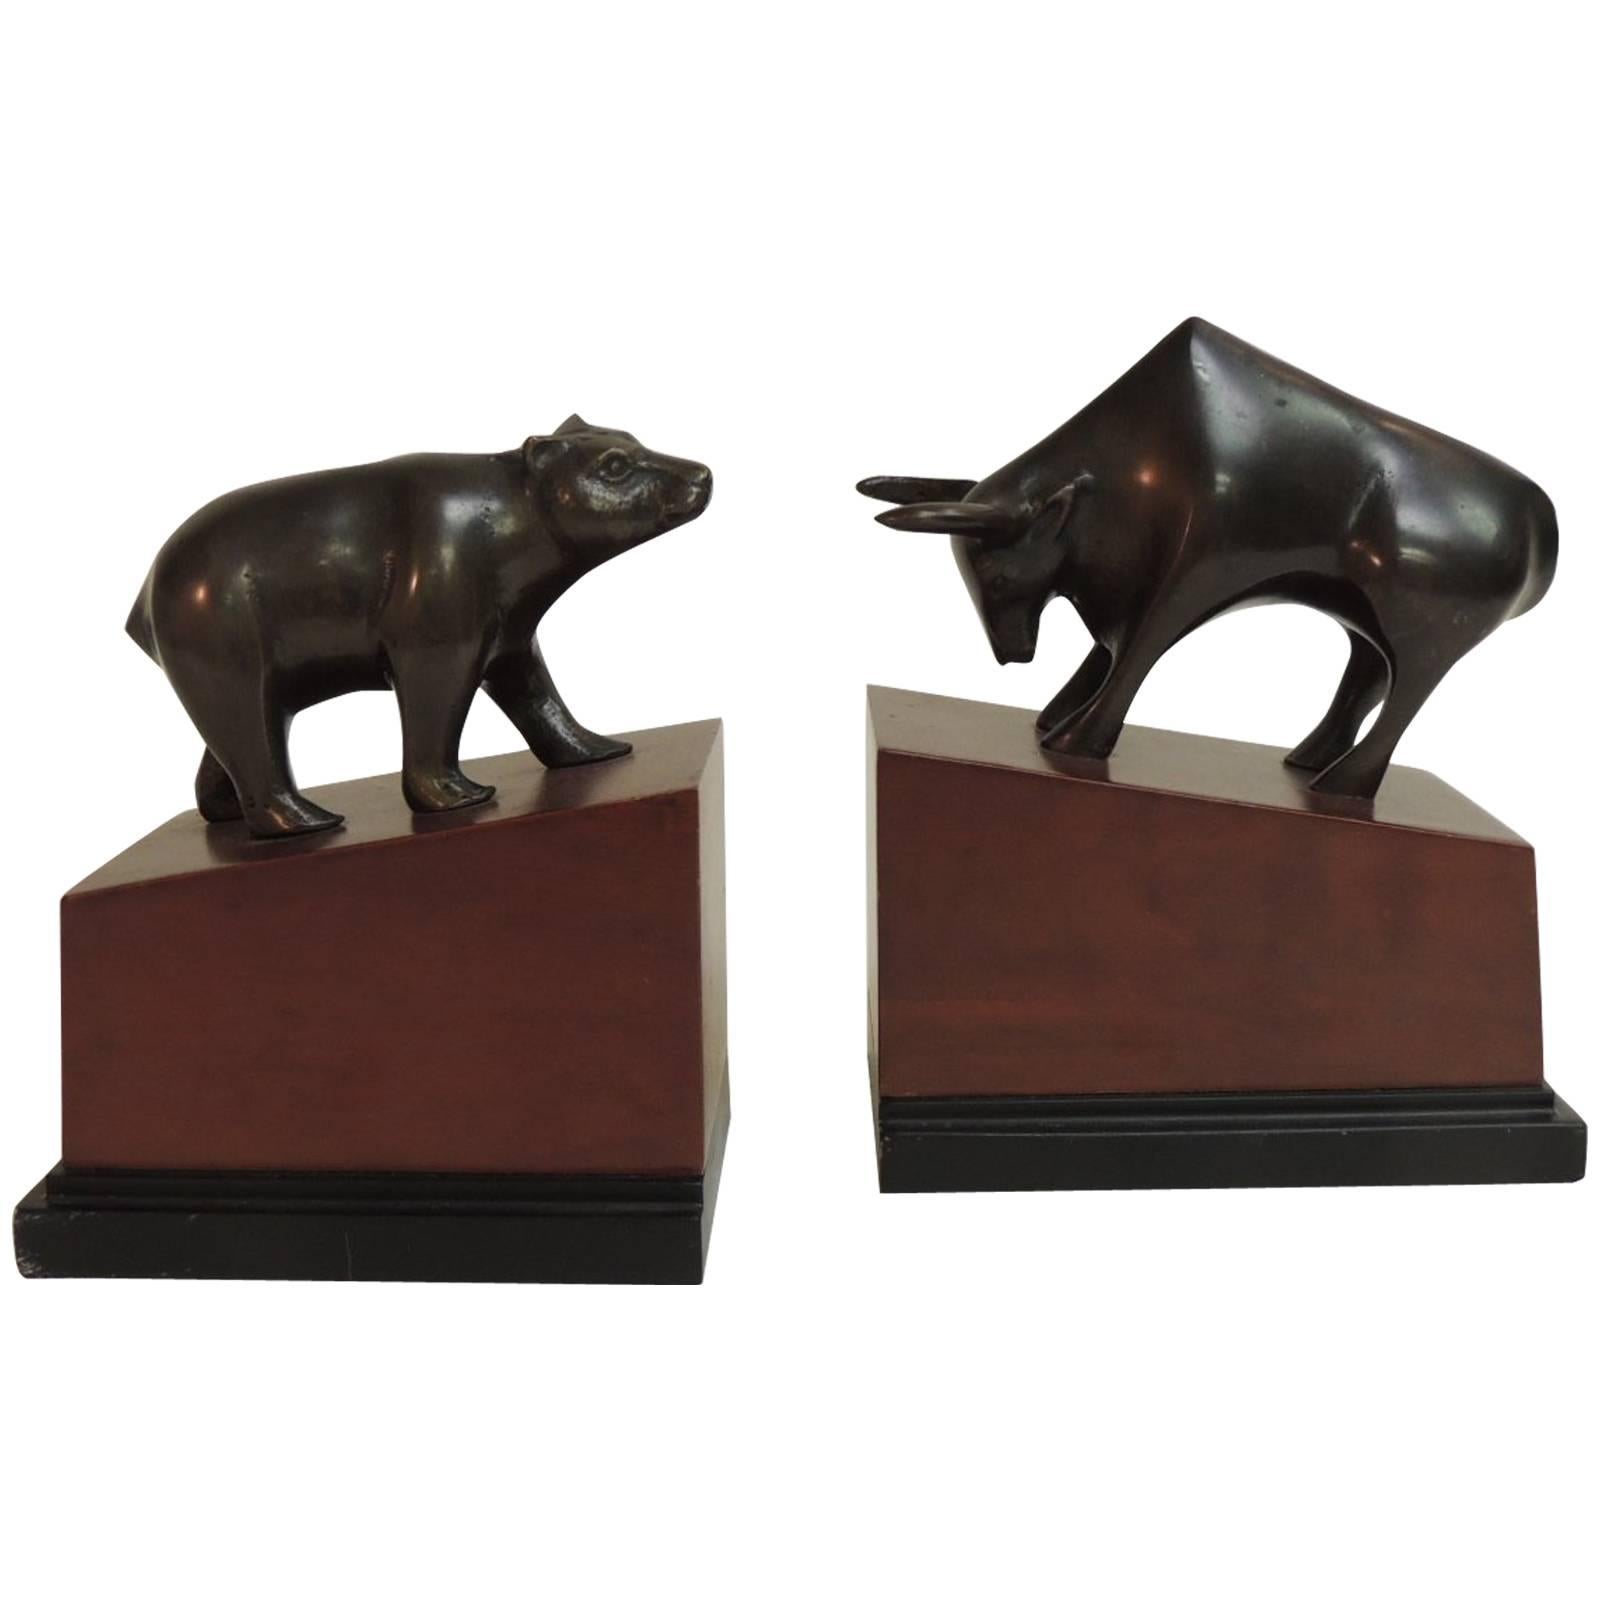 DOLLS HOUSE DETAILED HANDMADE PAIR OF SILVER CHARGING BULL BOOKENDS 